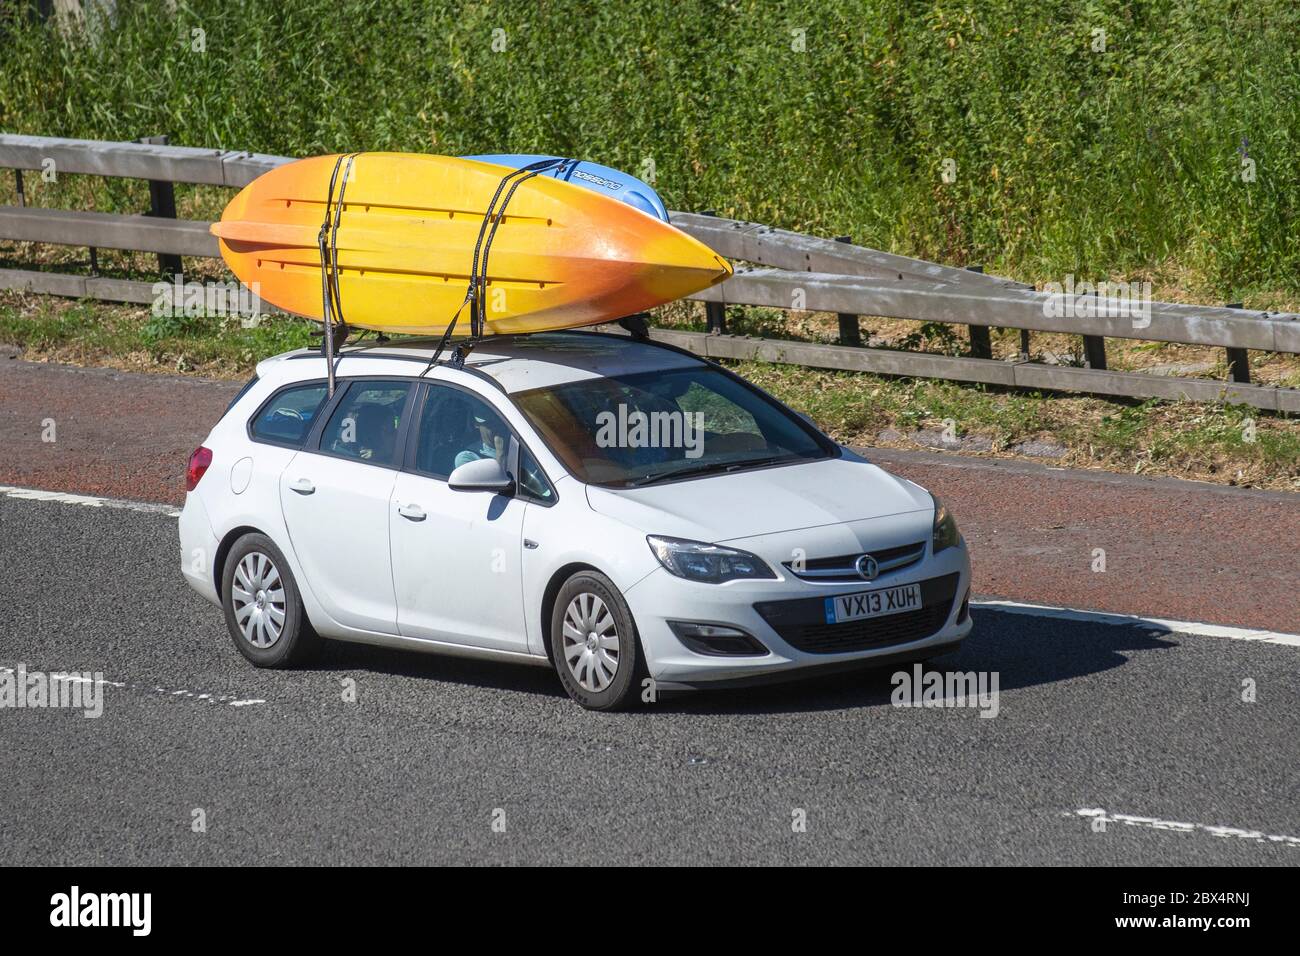 2013 white Vauxhall Astra 1.3 CDTi ecoFLEX Exclusiv 5dr. 5 door Manual Diesel Hatchback; carrying two canoes; Vehicular traffic moving vehicles, cars driving vehicle on UK roads, motors, motoring on the M6 motorway highway Stock Photo